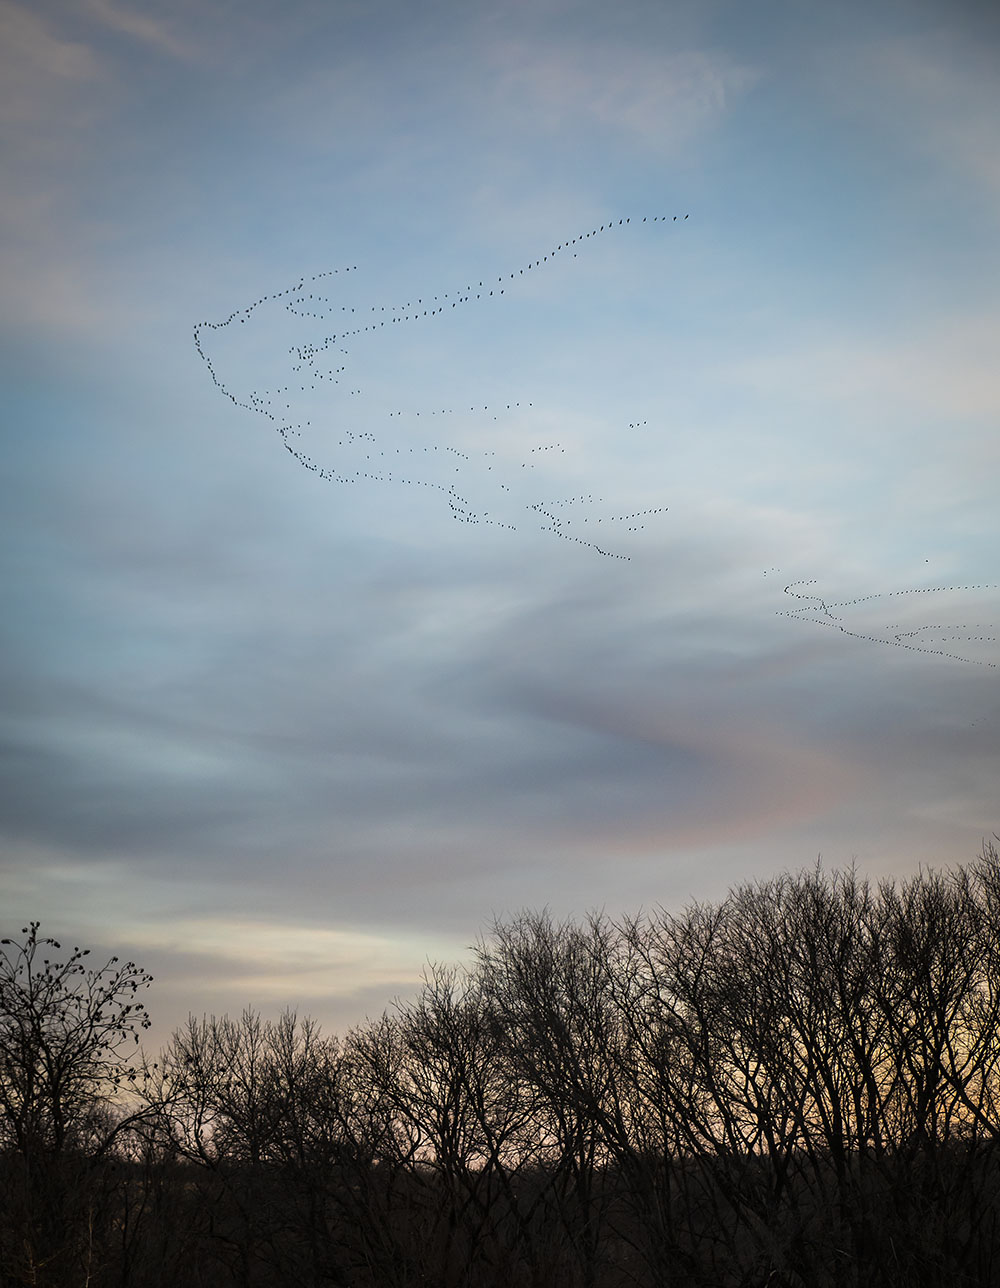 Snow geese flying over the trees at sunrise